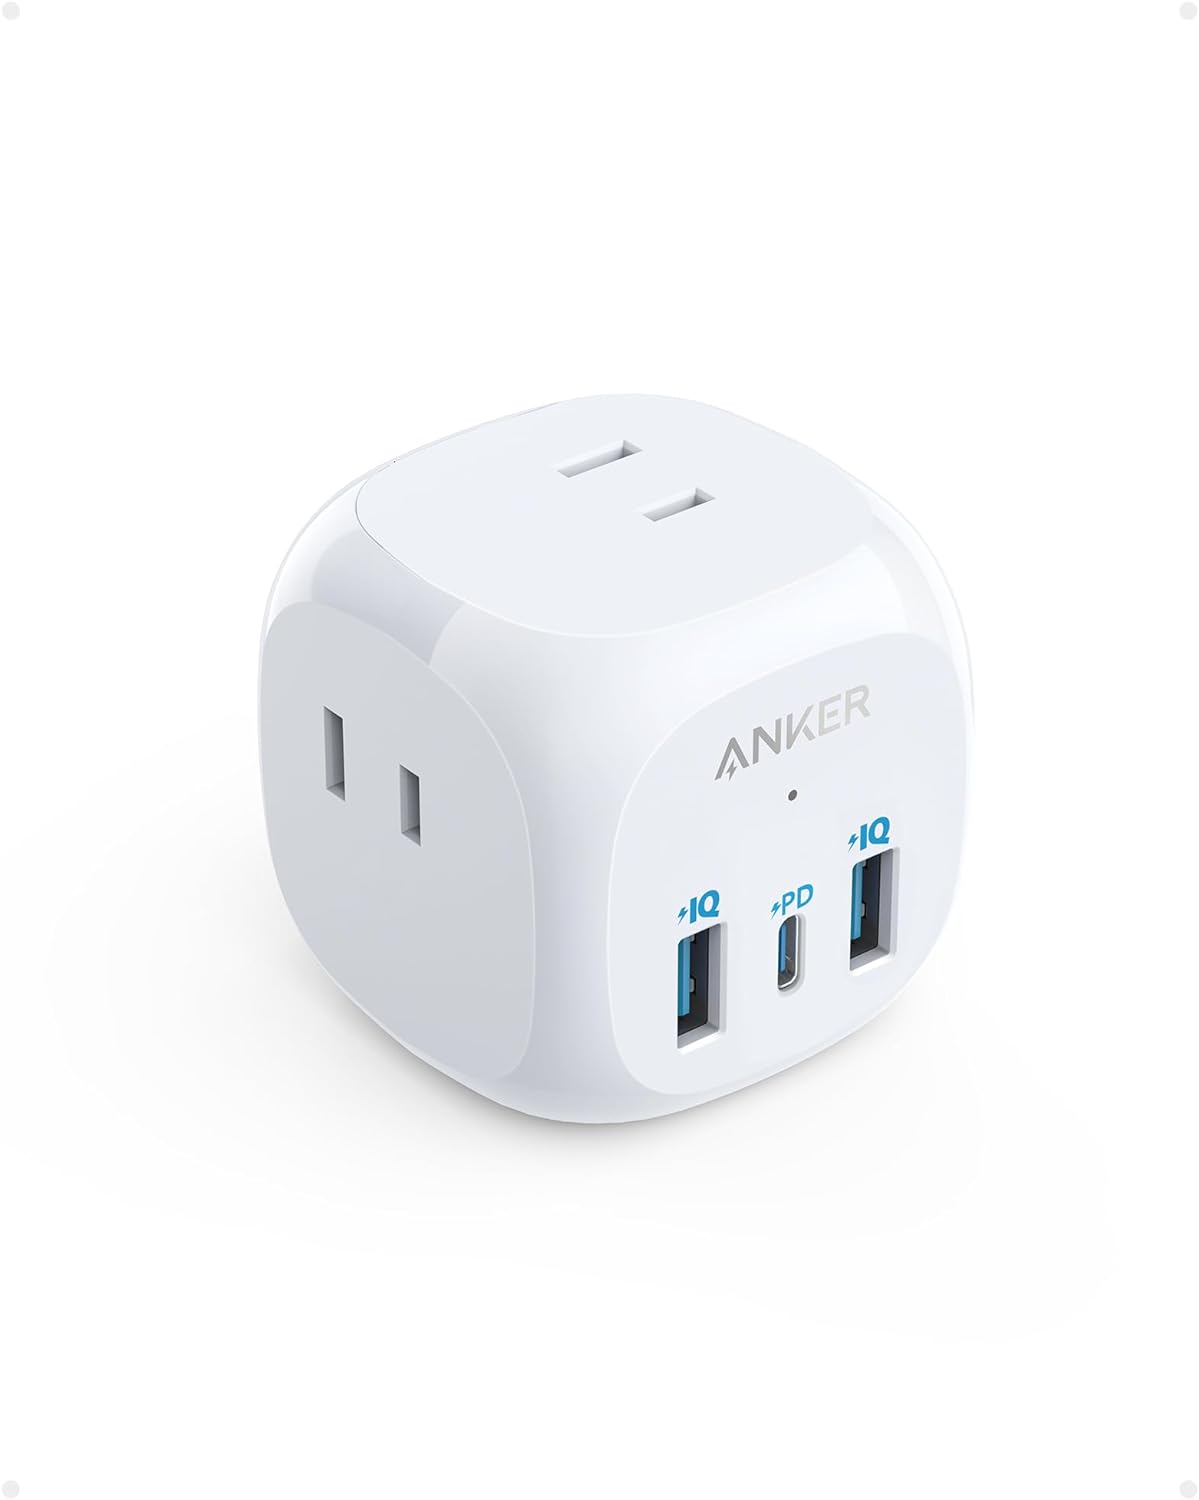 Anker PowerExtend (6-in-1)(USBタップ 電源タップ AC差込口 USB-Cポート USB-Aポート) 【PSE技術基準適合/USB Power Delivery対応/コンパクトサイズ】MacBook｜ankerdirect｜02